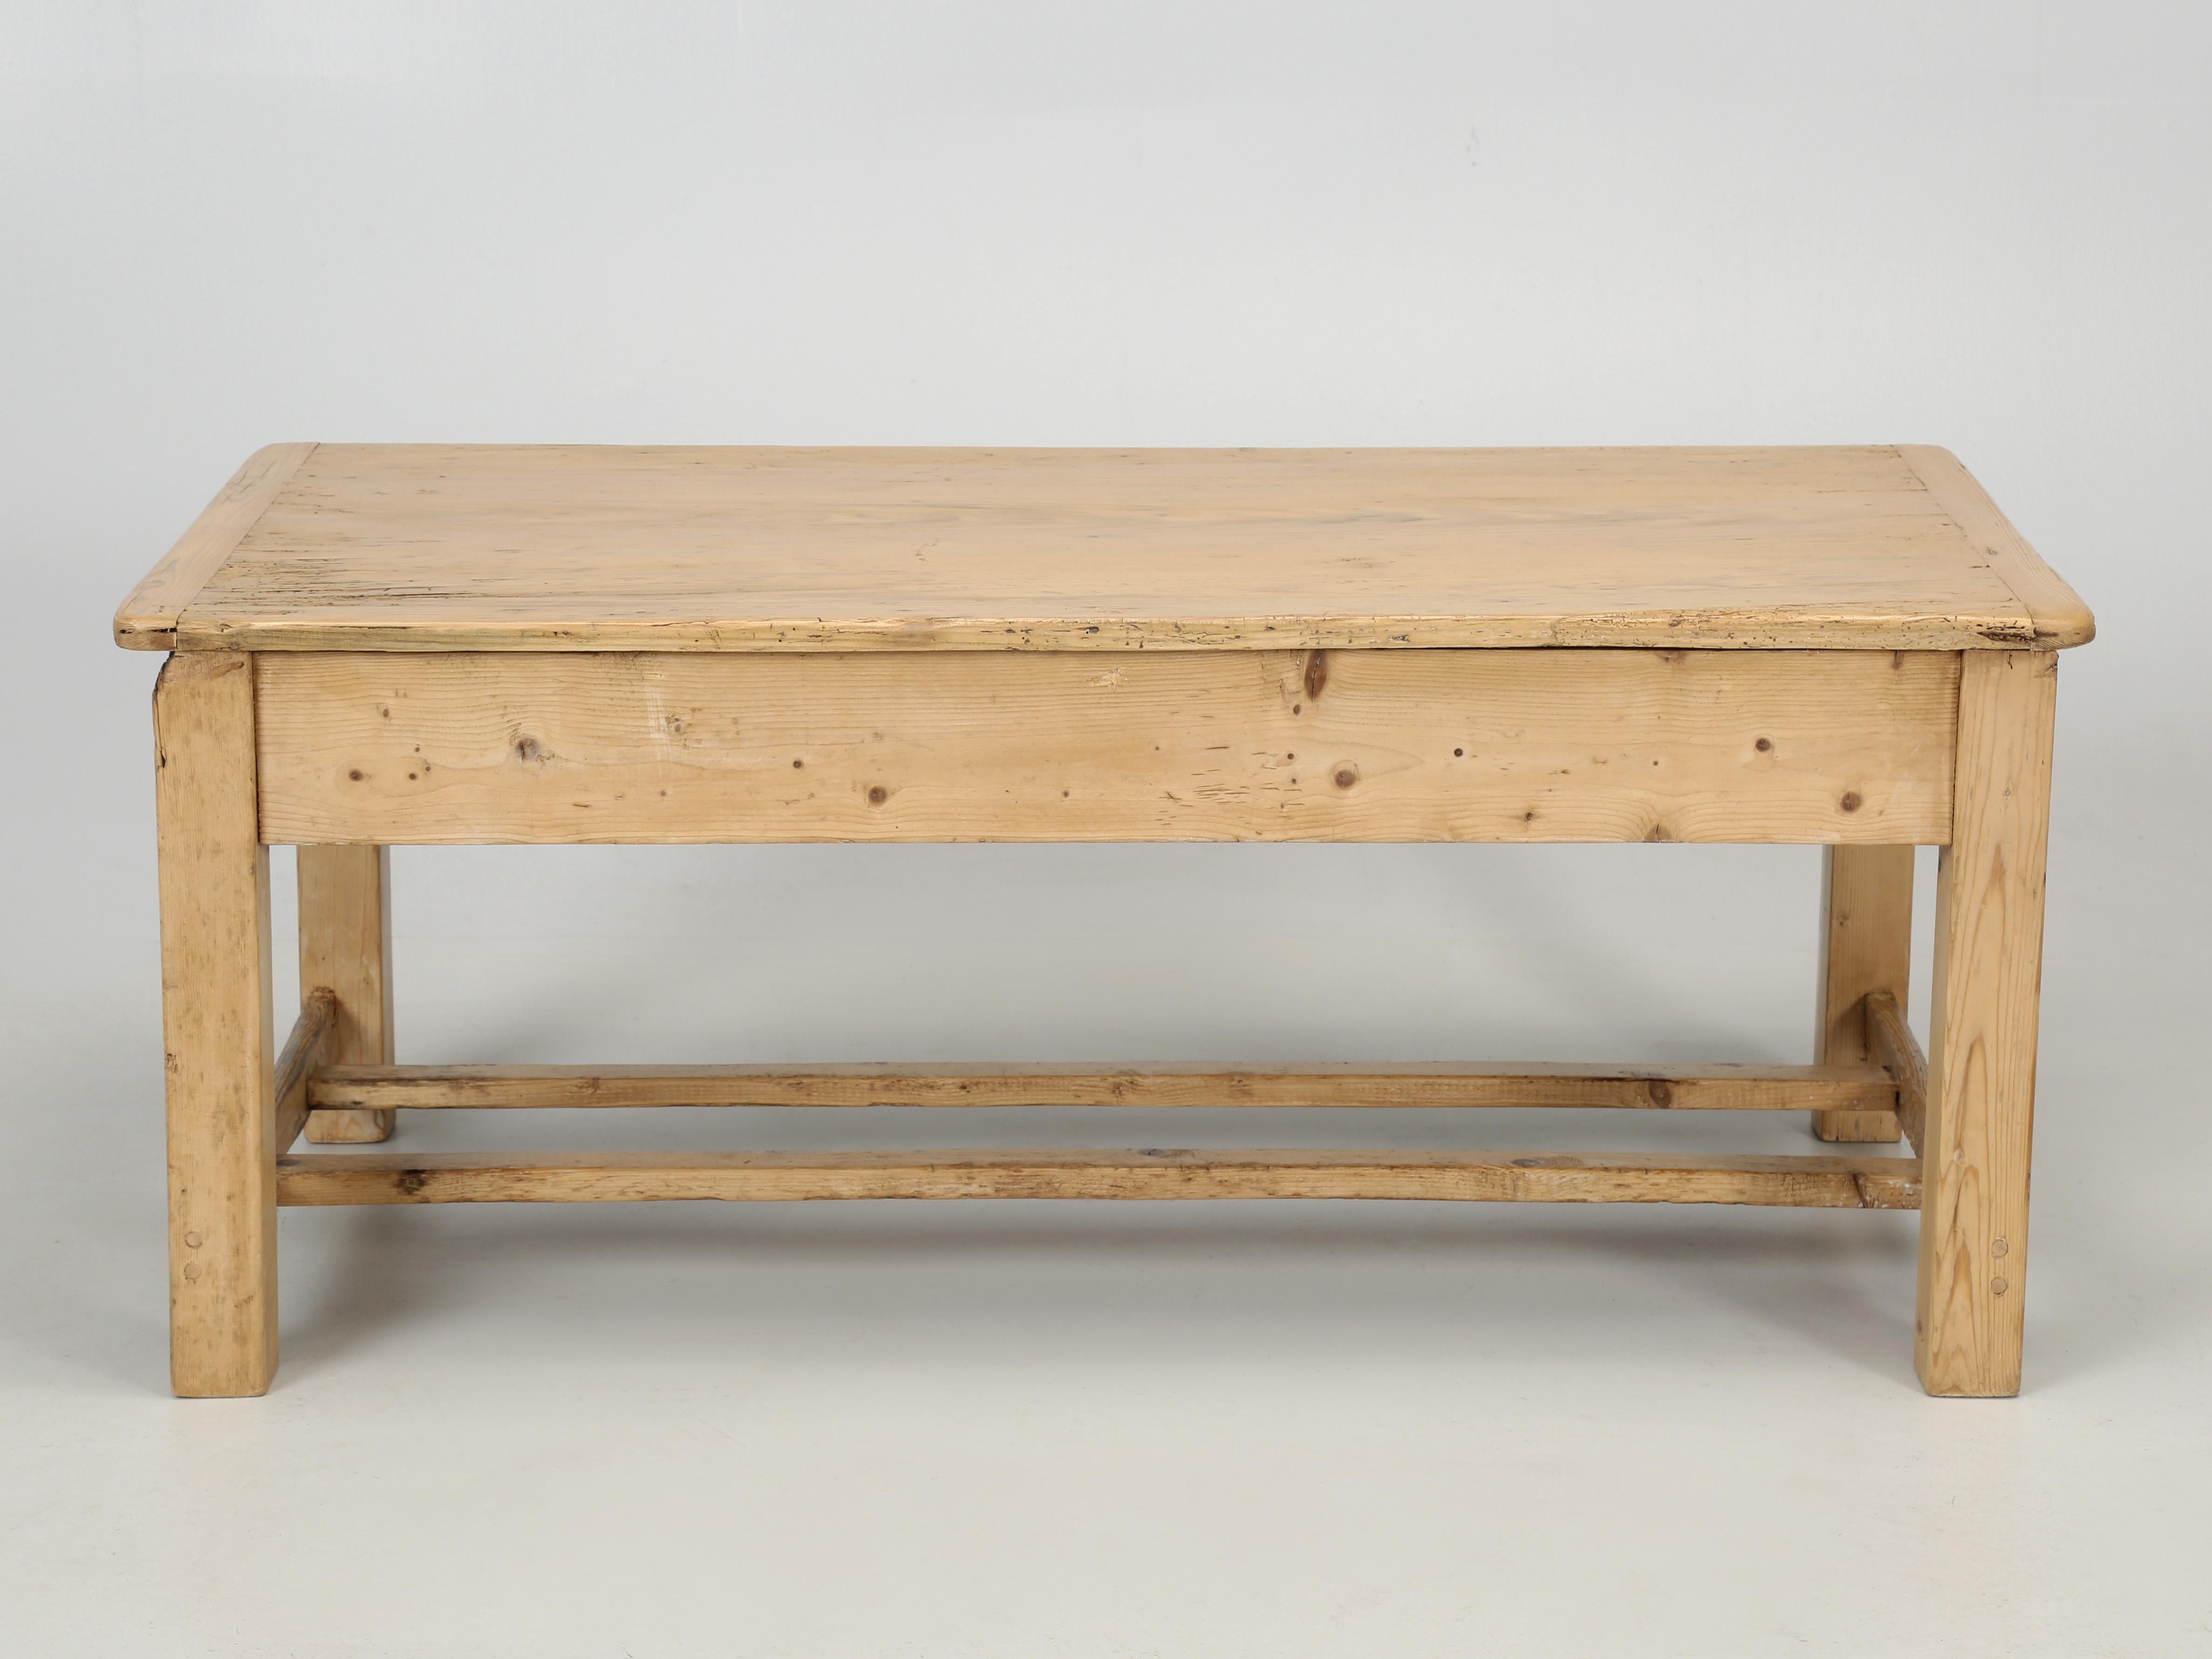 Antique Irish Scrubbed Pine Coffee Table Cut-Down from a Kitchen Table, c1900 1